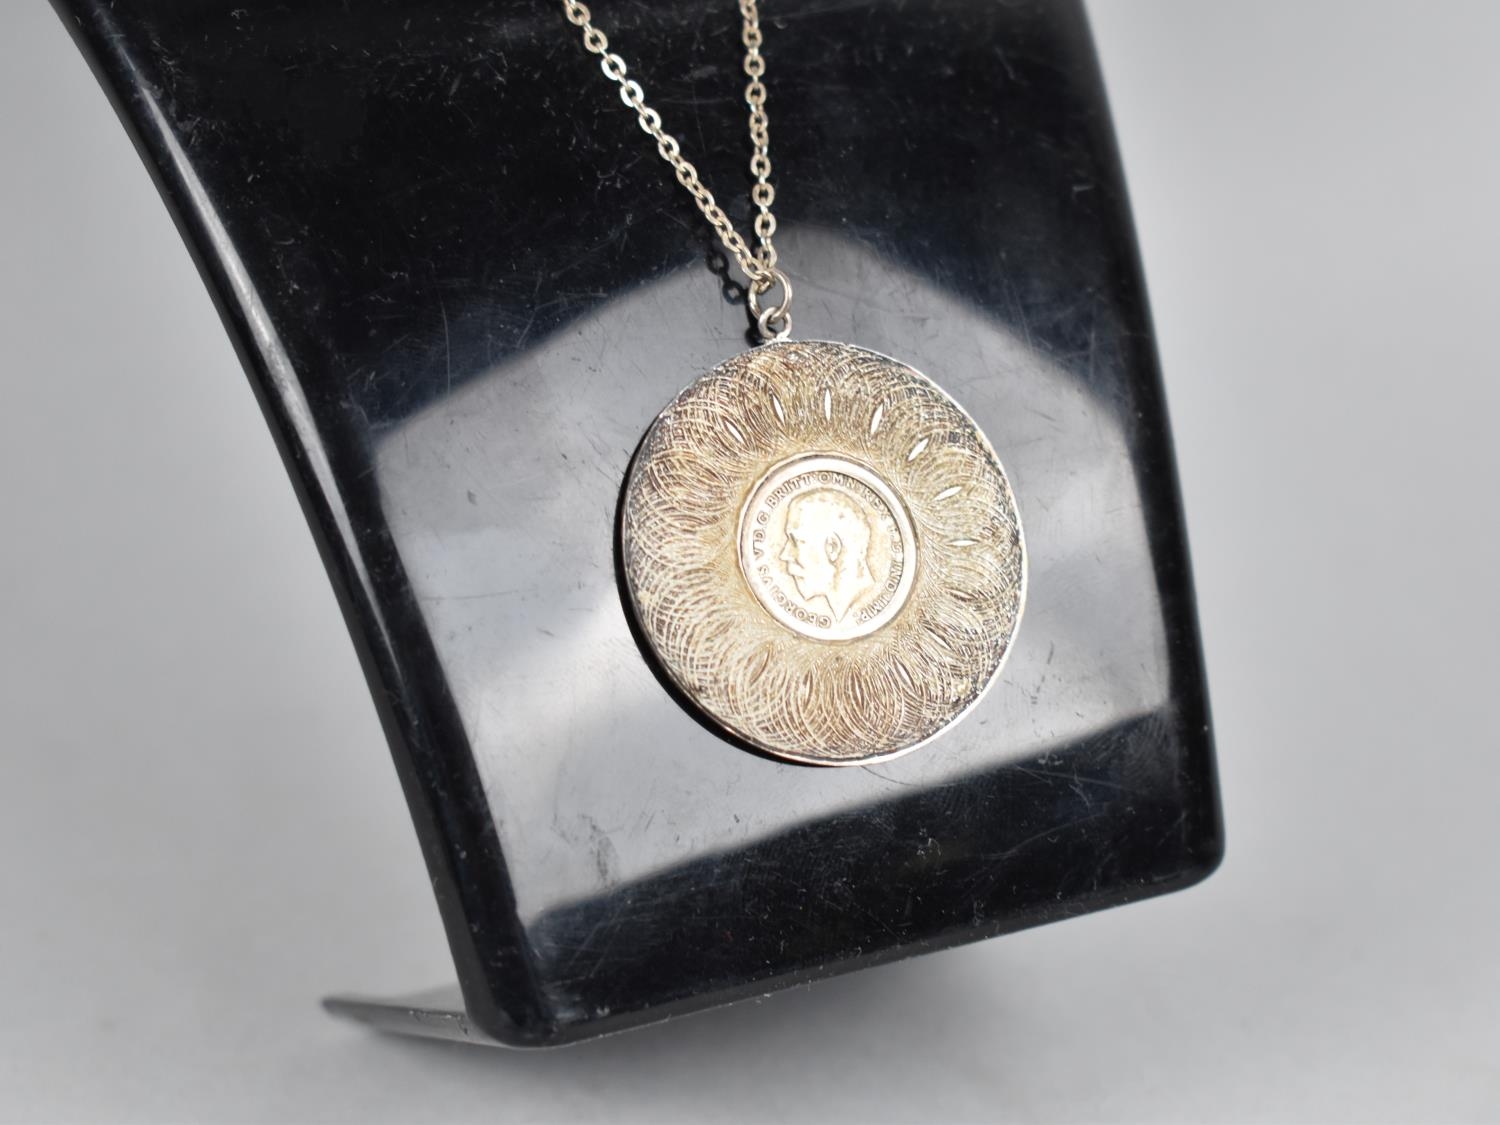 A Silver Filigree Circular Pendant with inset Threepenny Bits on Silver Chain - Image 3 of 4